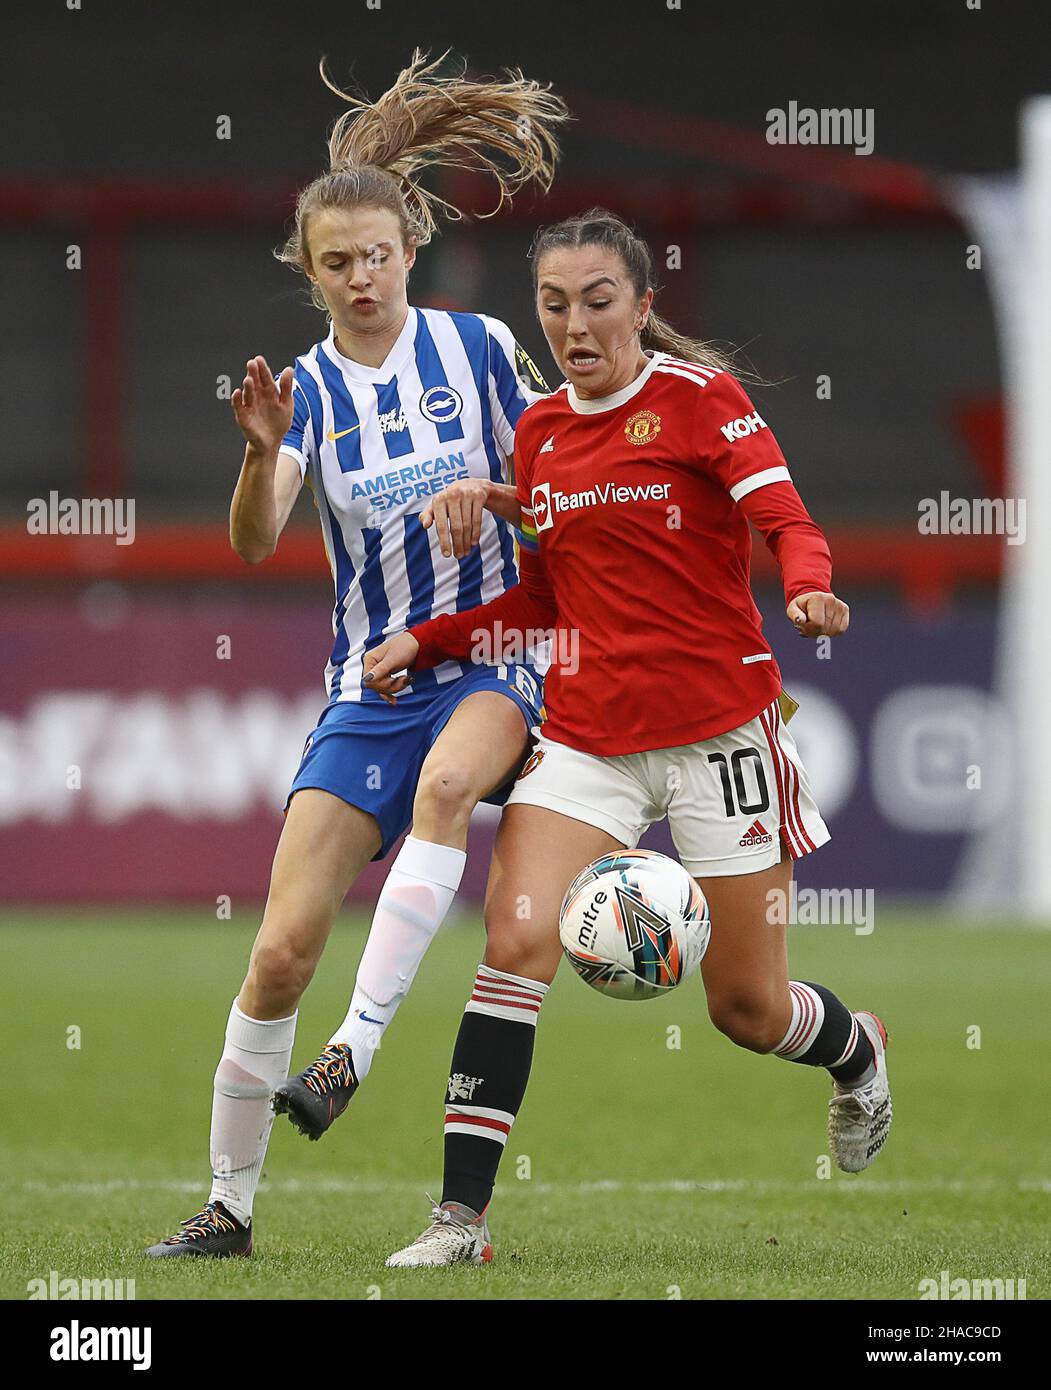 Crawley, UK. 12th Dec, 2021. Ellie Brazil of Brighton and Hove Albion and Katie Zelem of Manchester United challenge for the ball during the The FA Women's Super League match at The People's Pension Stadium, Crawley. Picture credit should read: Paul Terry/Sportimage Credit: Sportimage/Alamy Live News Credit: Sportimage/Alamy Live News Stock Photo